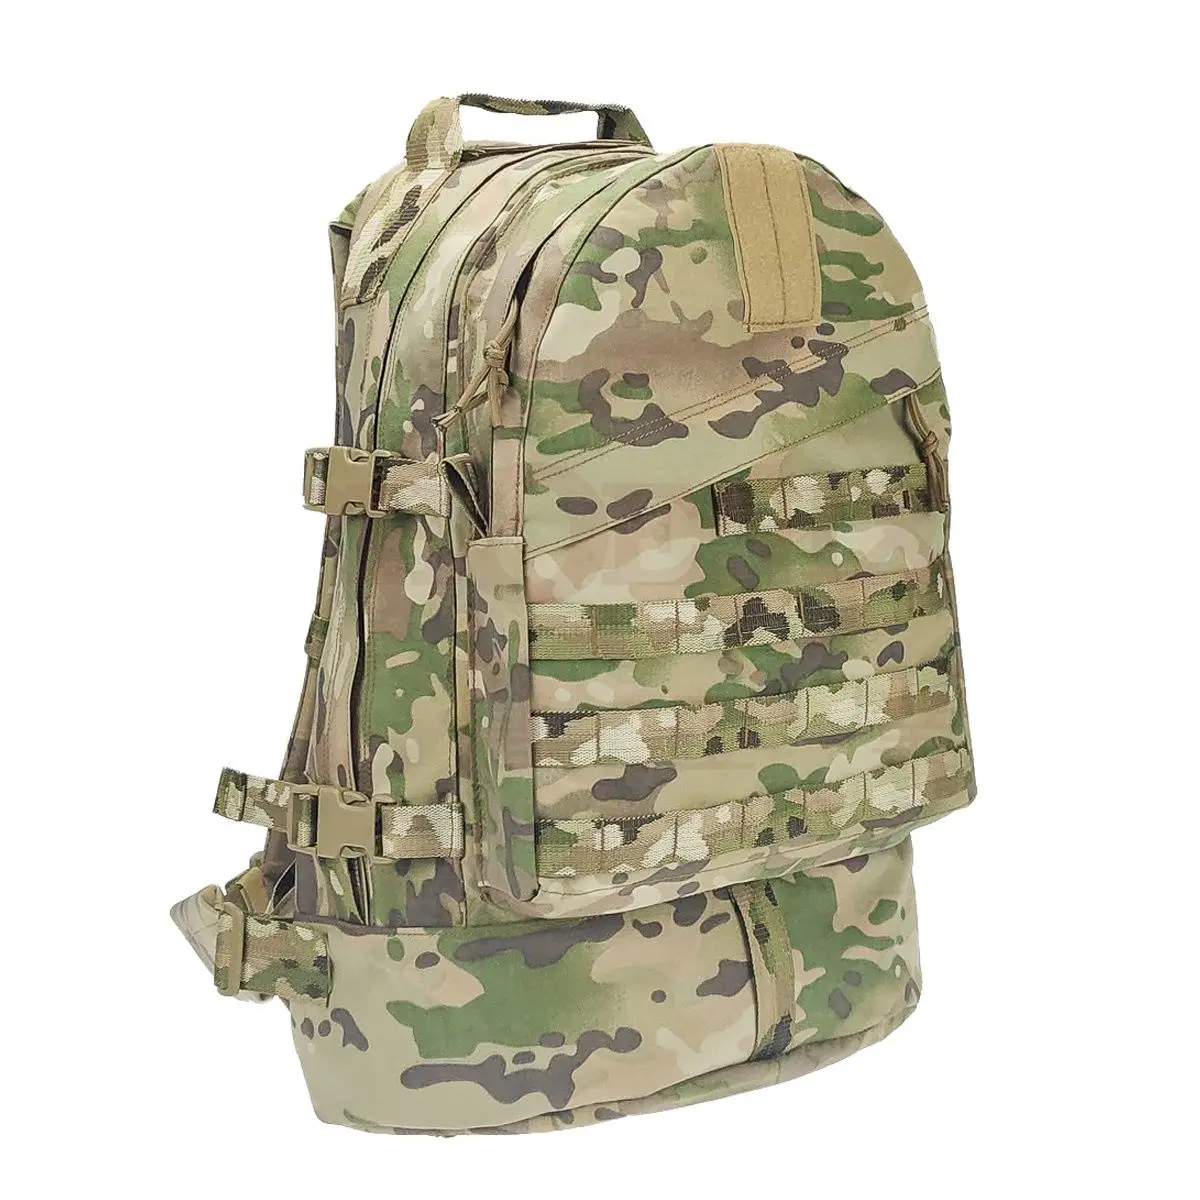 Outdoor Tactical 3D Tactical Commuting Replica Game Double Backpack Five Colors With Multicam Camouflage